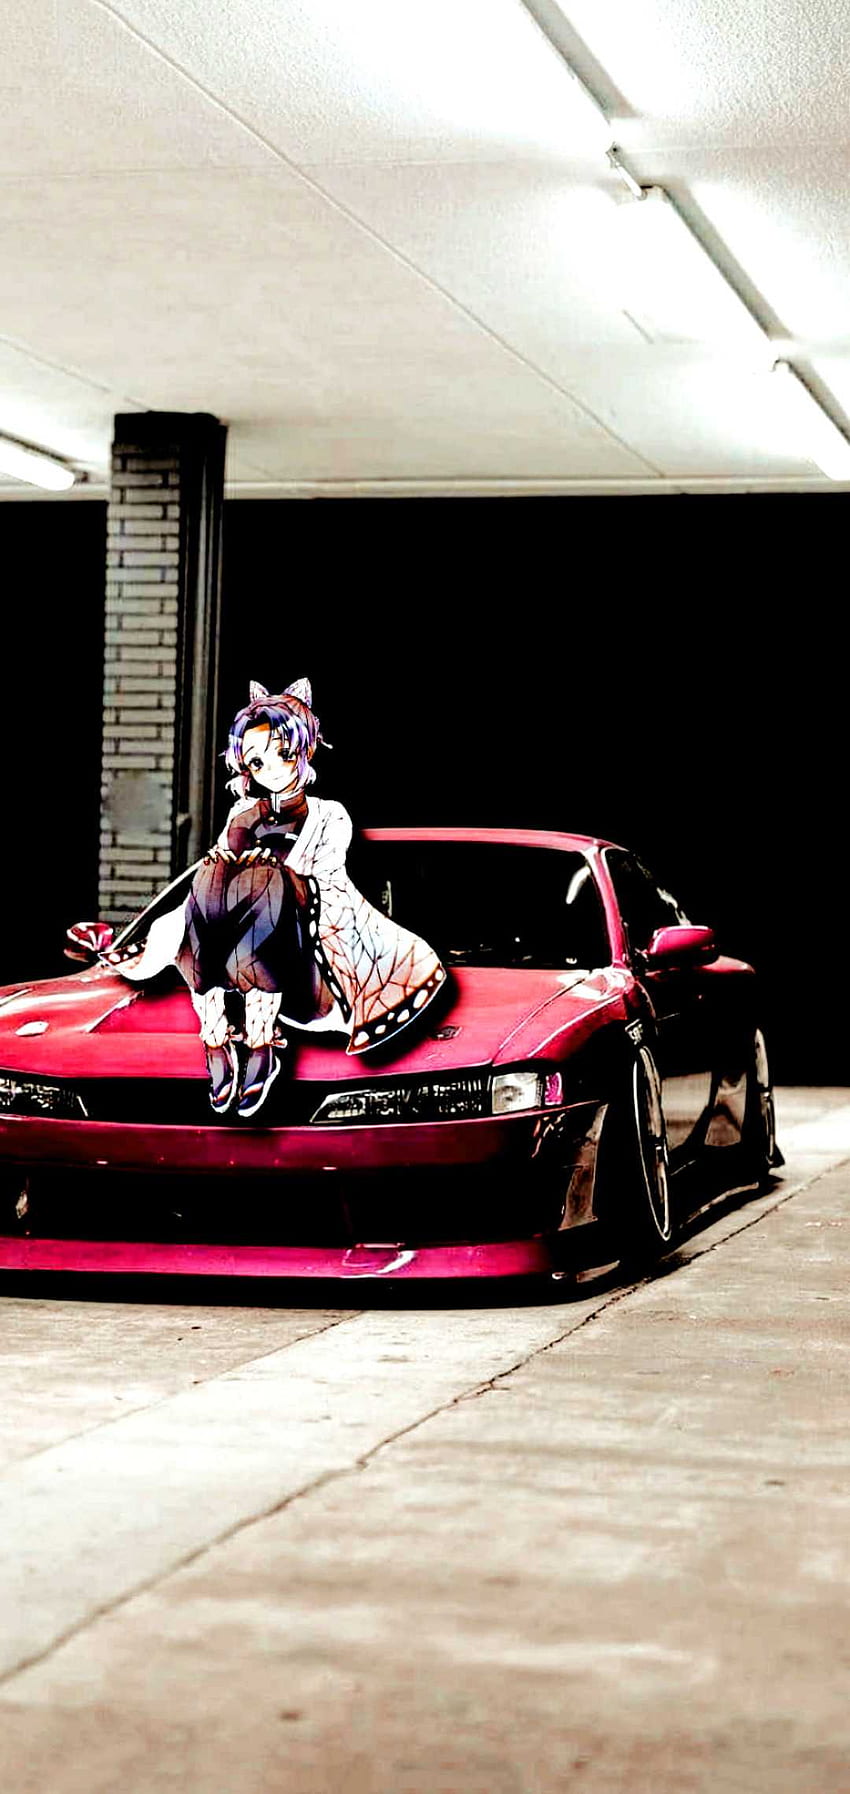 Wallpaper anime, manga, japanese, Drifters for mobile and desktop, drifters  anime hd - thirstymag.com